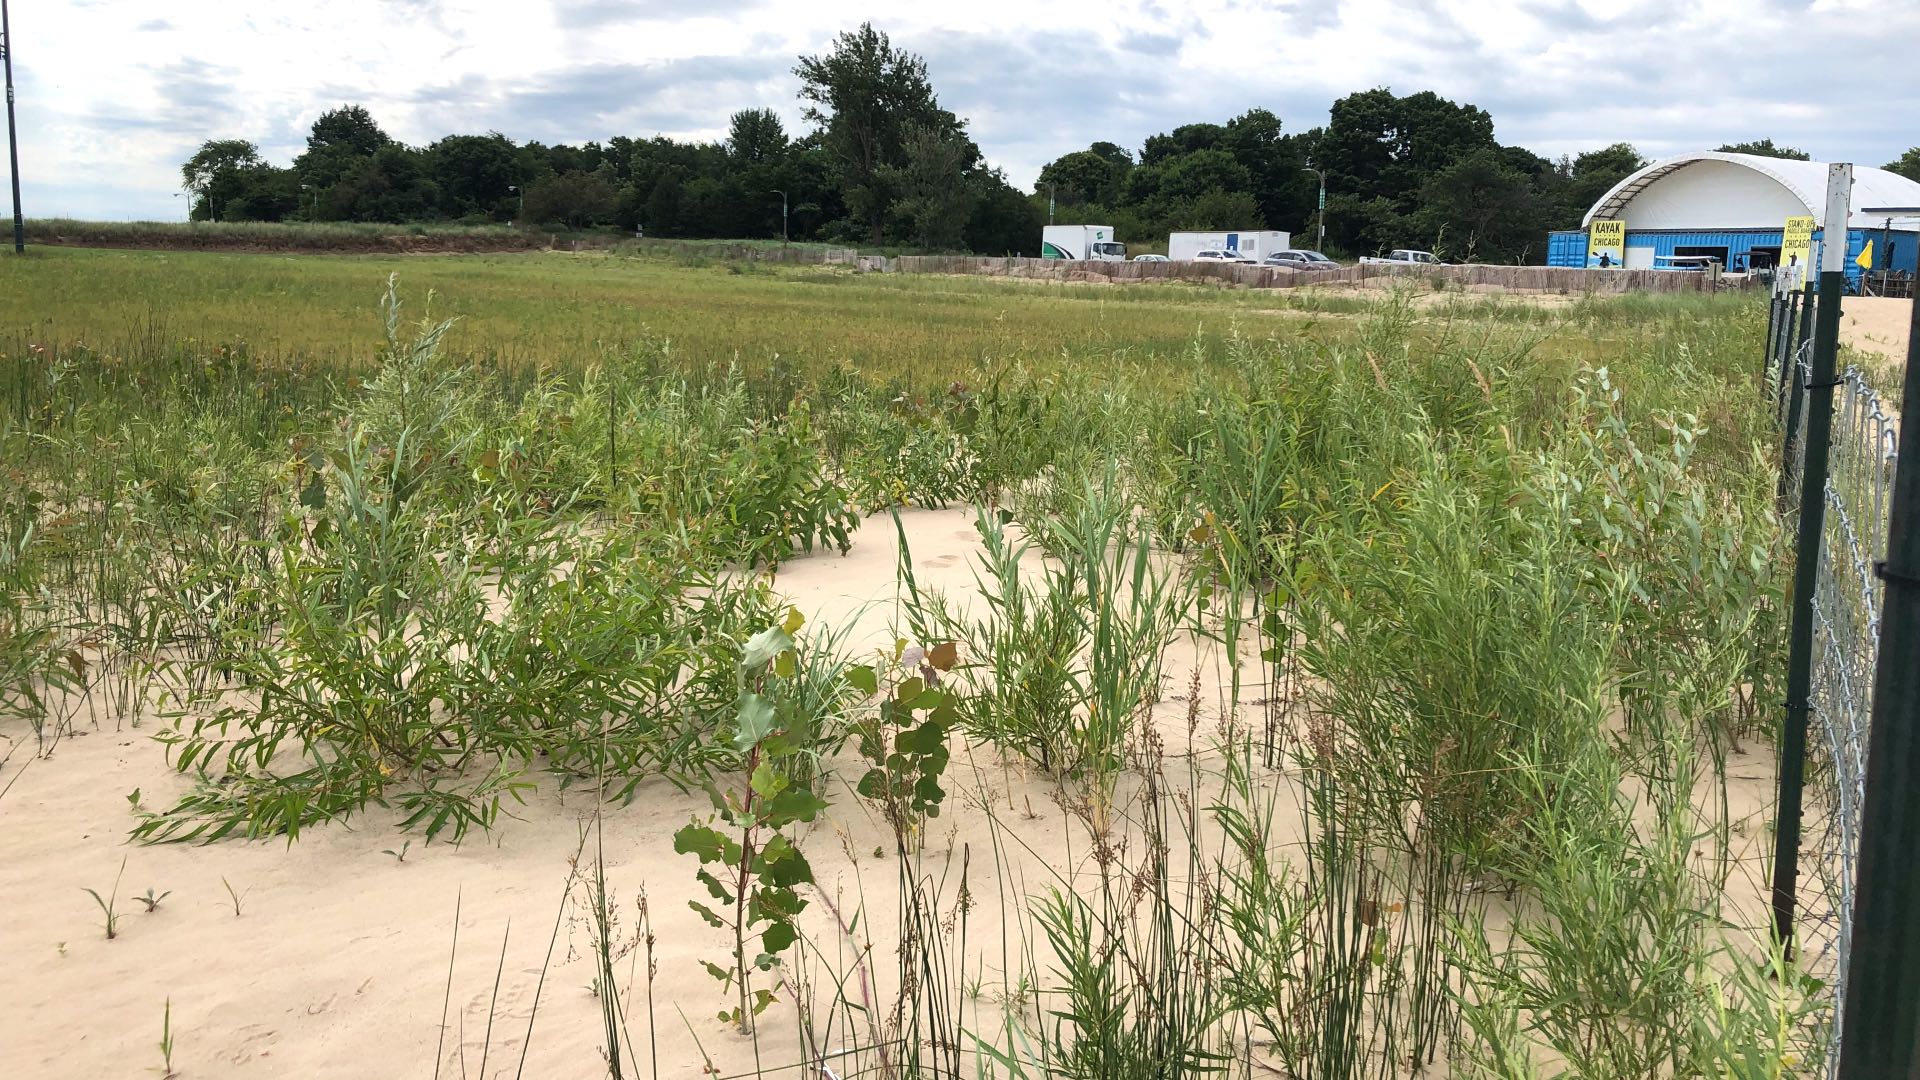 What’s Occurred to Montrose Dunes With out Monty and Rose? Park District Says the Space Isn’t Being Uncared for | Chicago Information